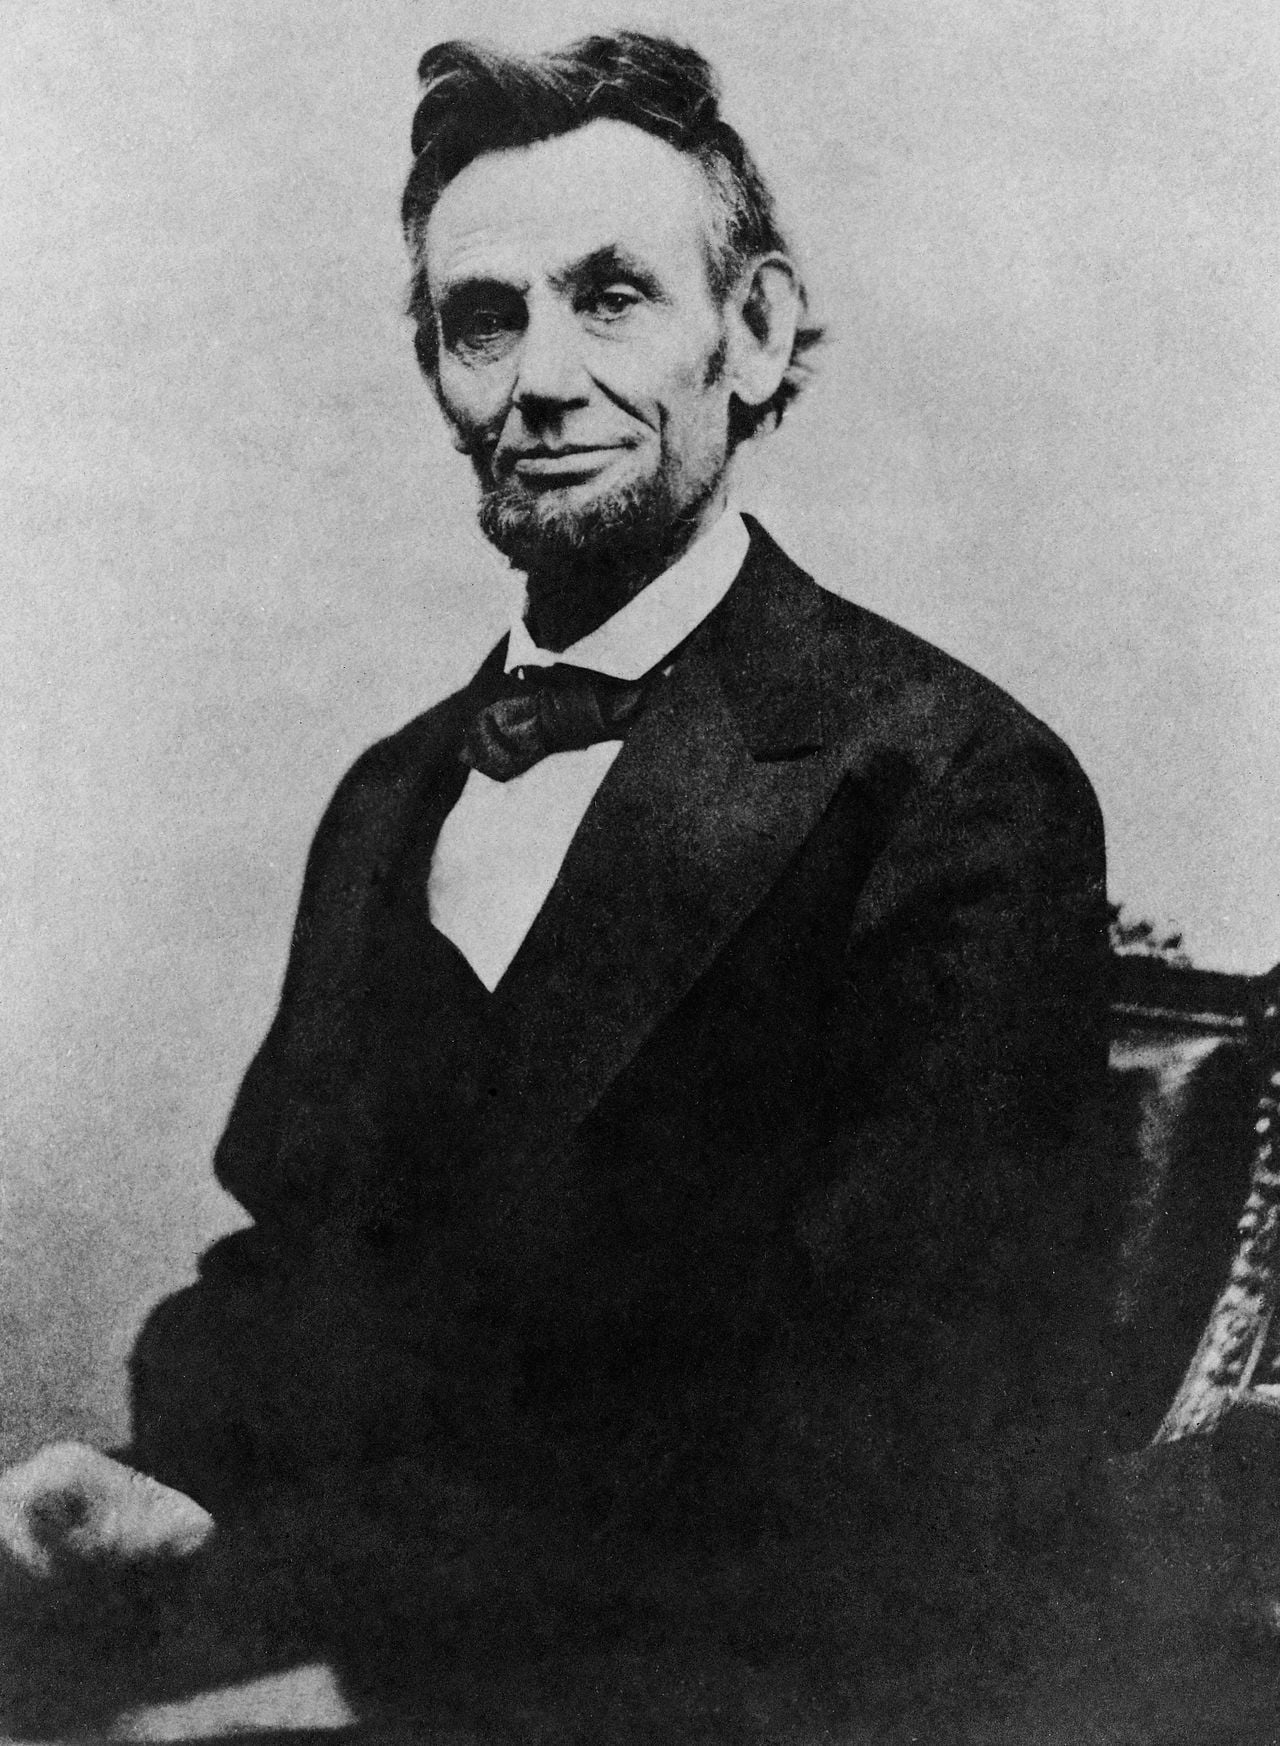 A portrait of Abraham Lincoln in the final year of the Civil War. Taken in February 5th, 1865.